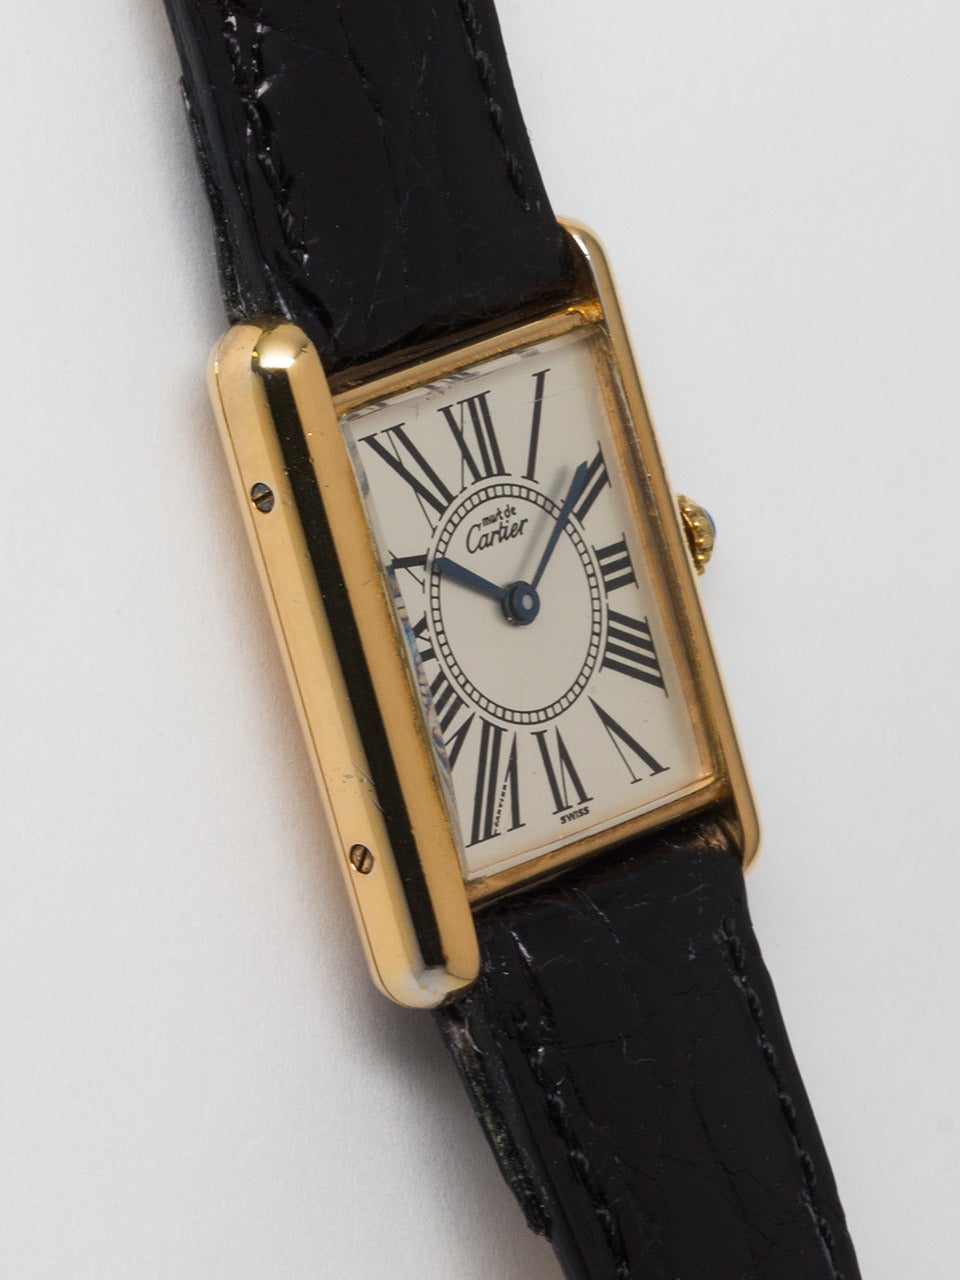 Cartier Man's Vermeil Tank Louis Must de Cartier, circa 1980s. Vermeil, 20 microns gold over silver, 23.5 X 31mm case secured by four screws. White dial signed Must de Cartier with exaggerated Roman numerals around bulls eye center and blued spade